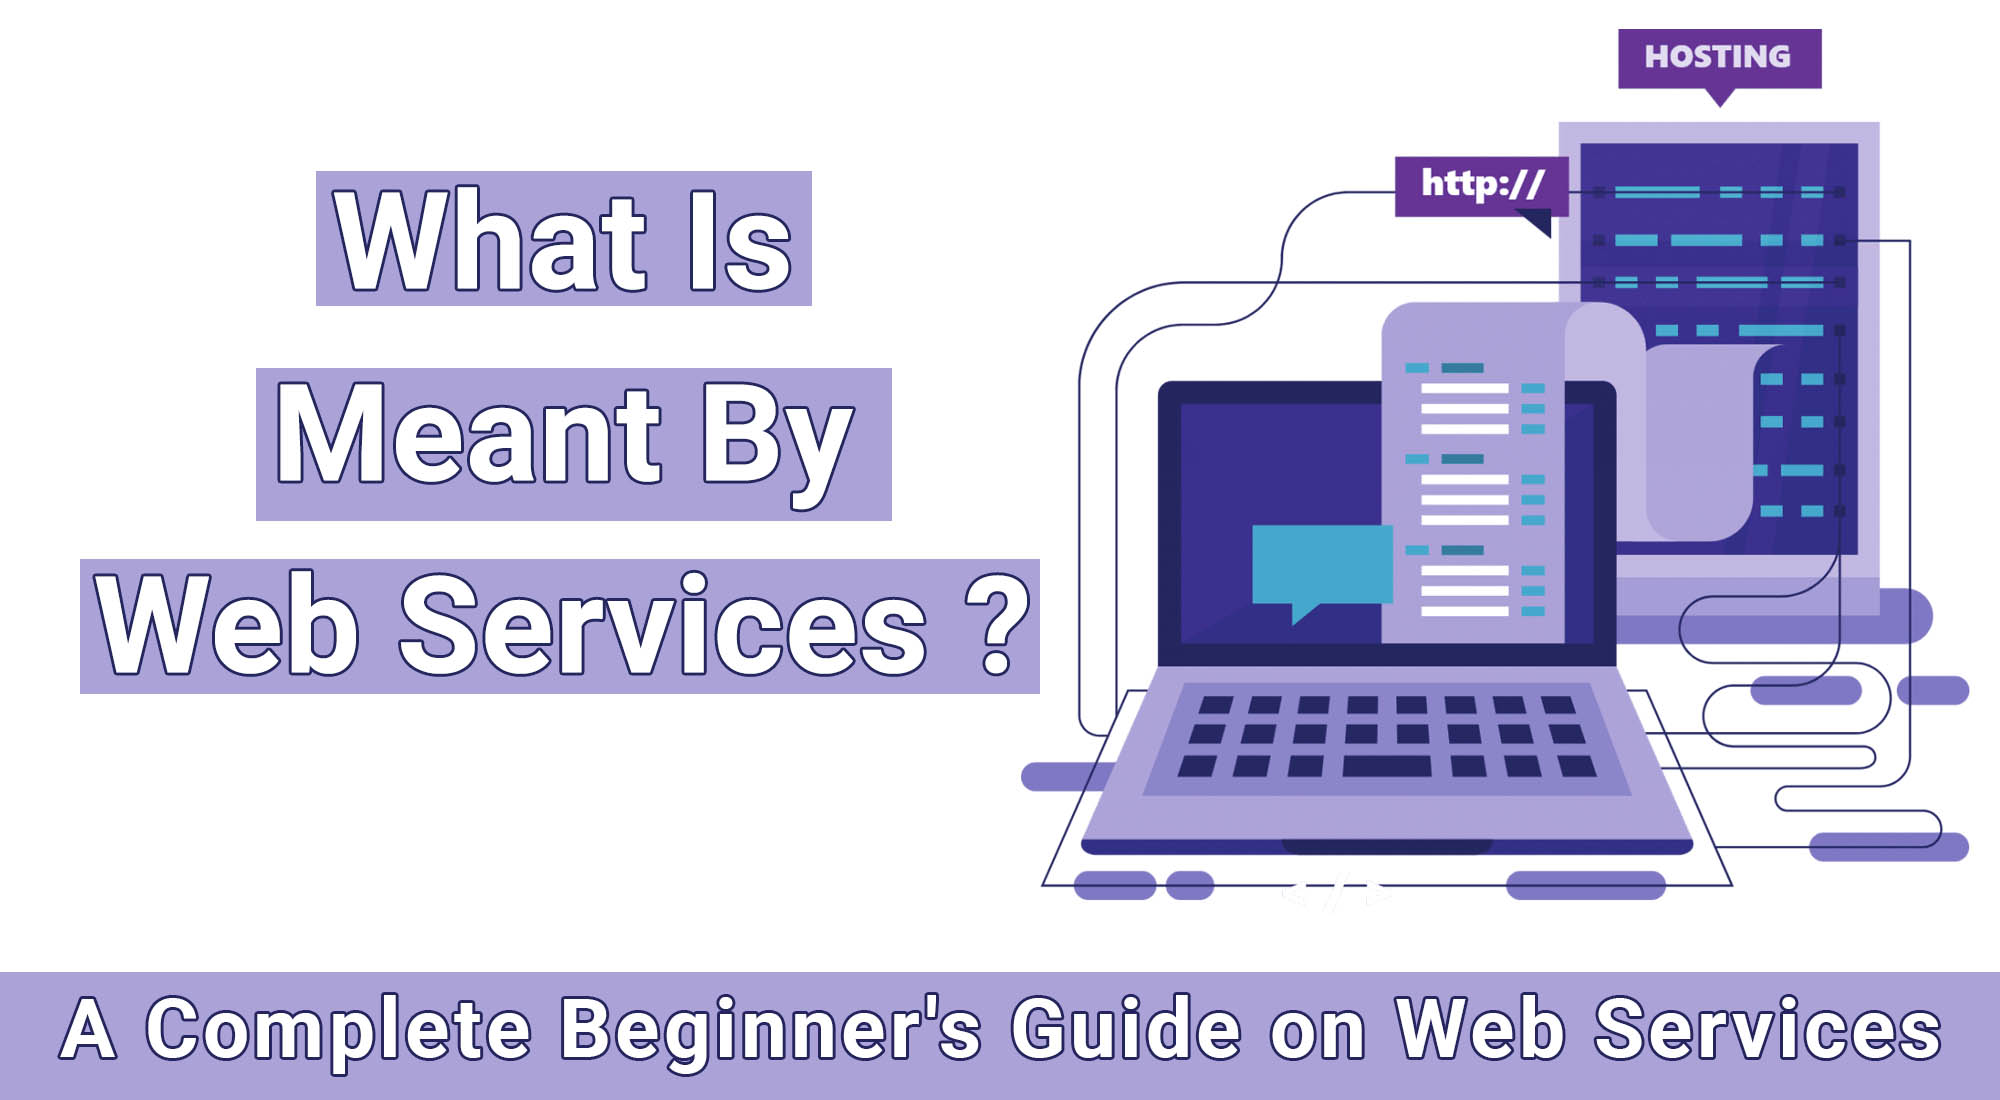 What Is Meant By Web Services